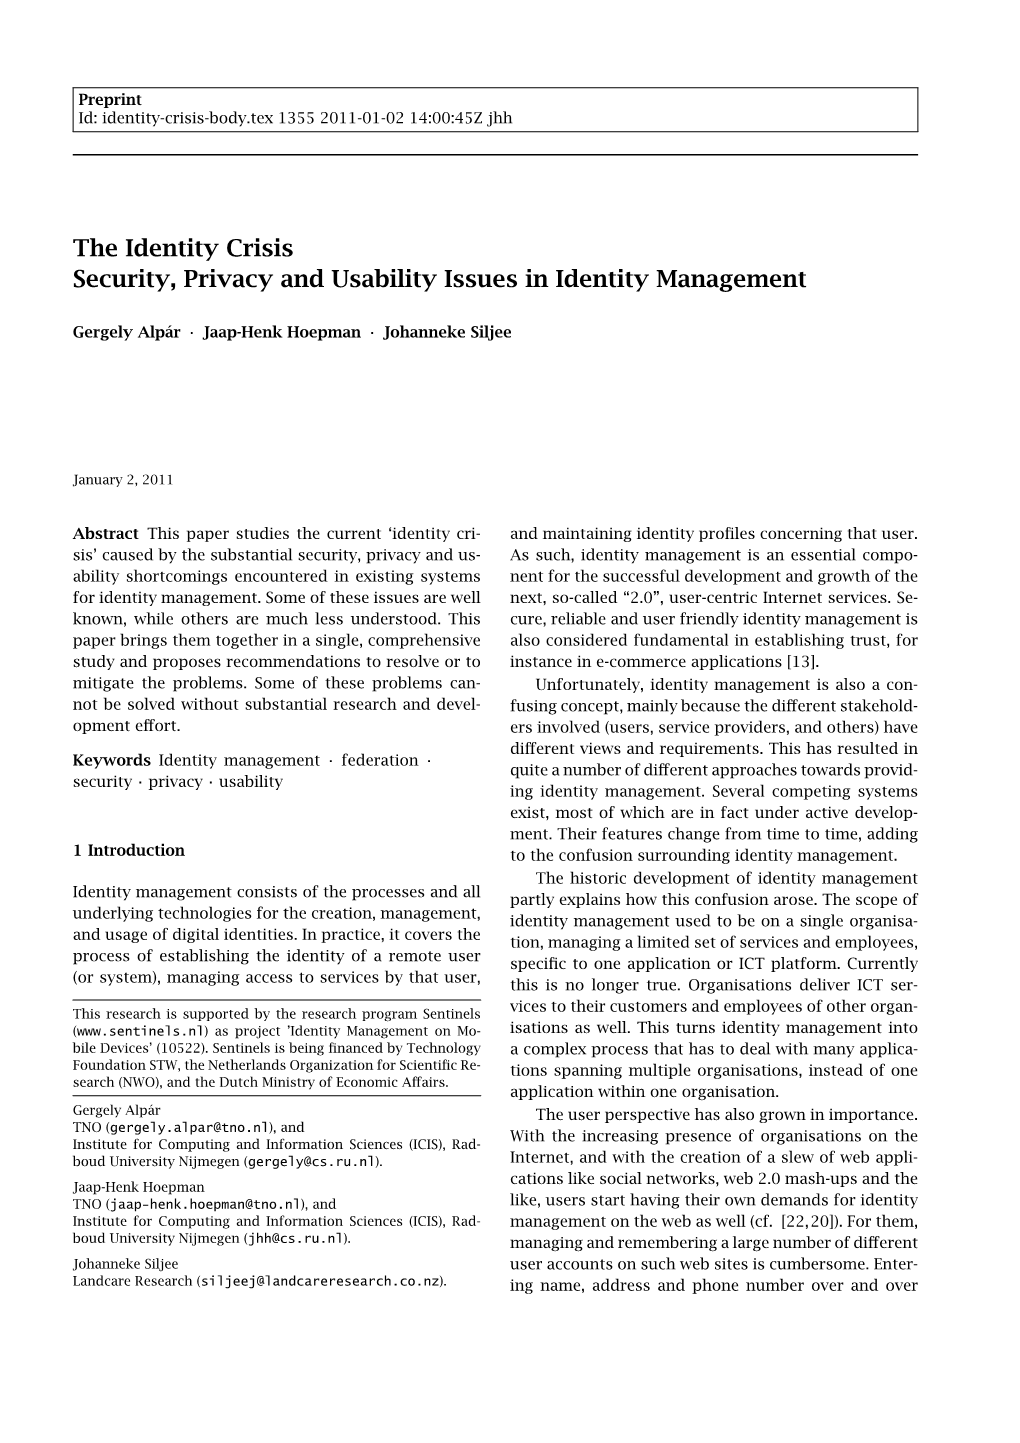 The Identity Crisis Security, Privacy and Usability Issues in Identity Management